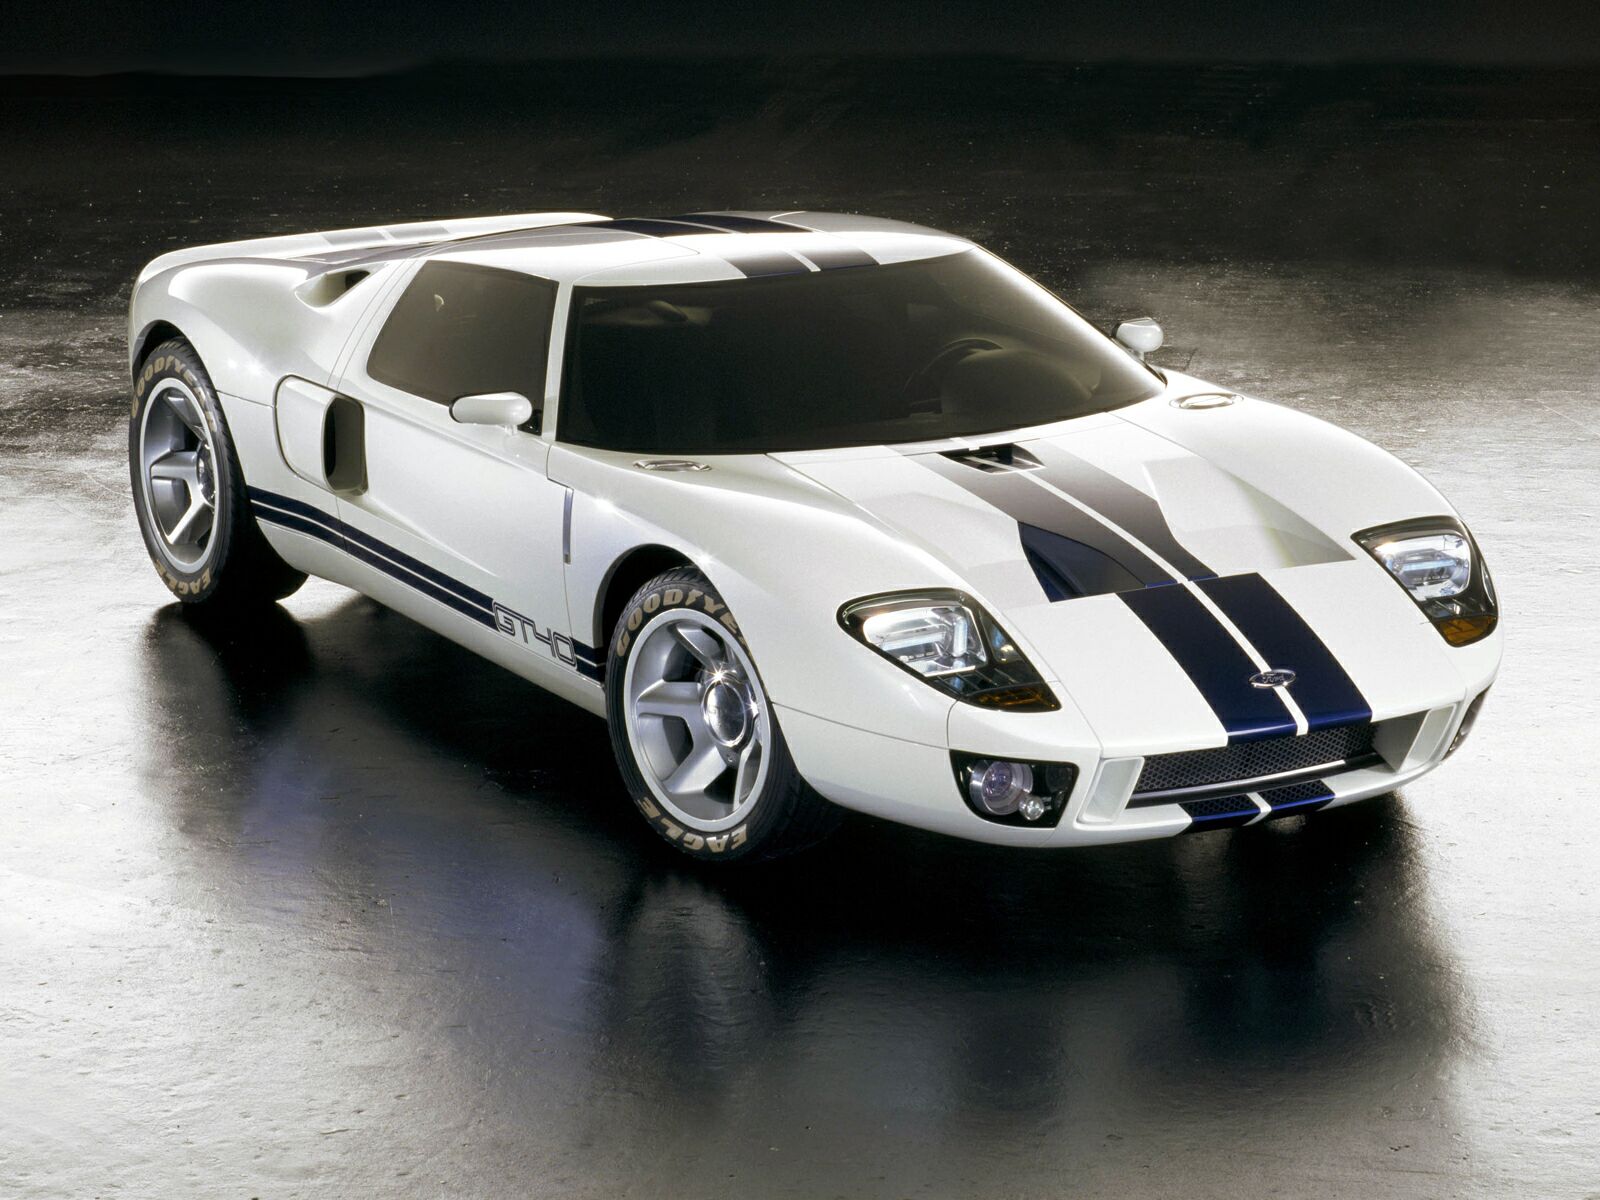 2006 Ford GT - Pictures - 2006 Ford GT Base picture - CarGurus